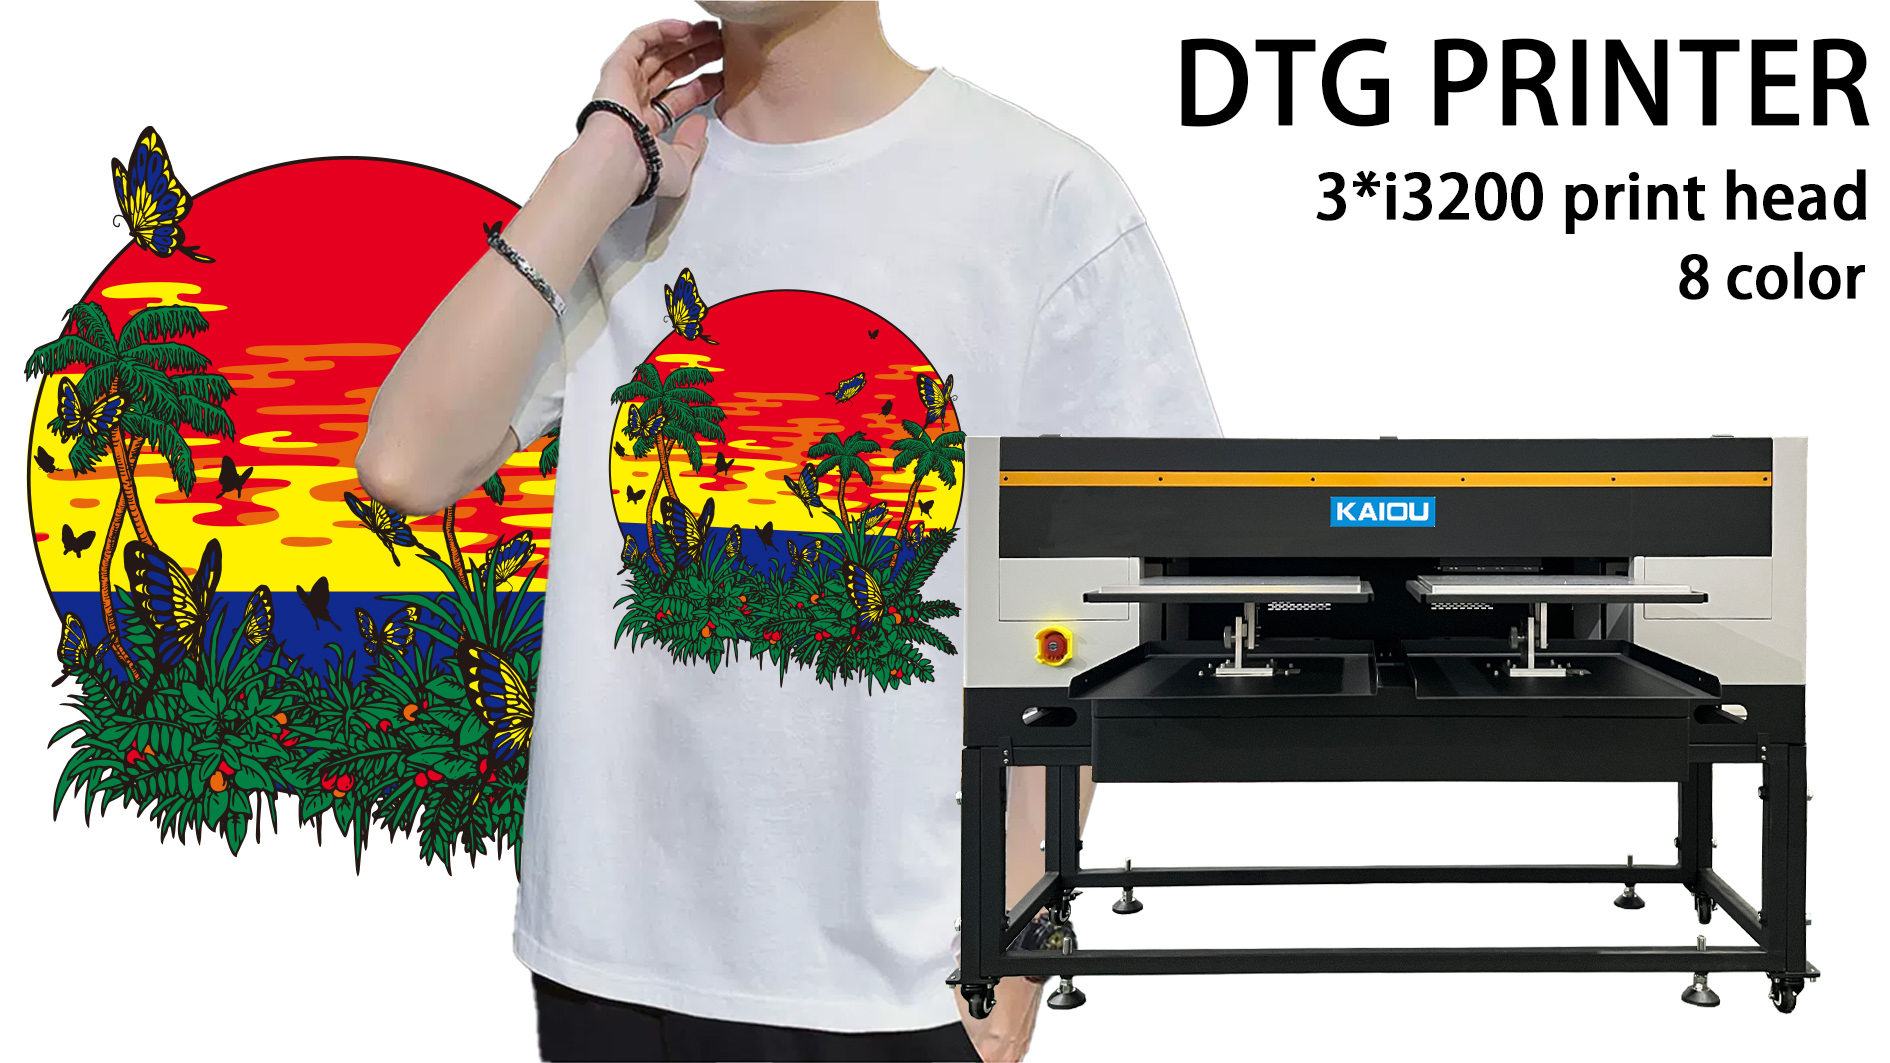 Quick guide for DTG printer